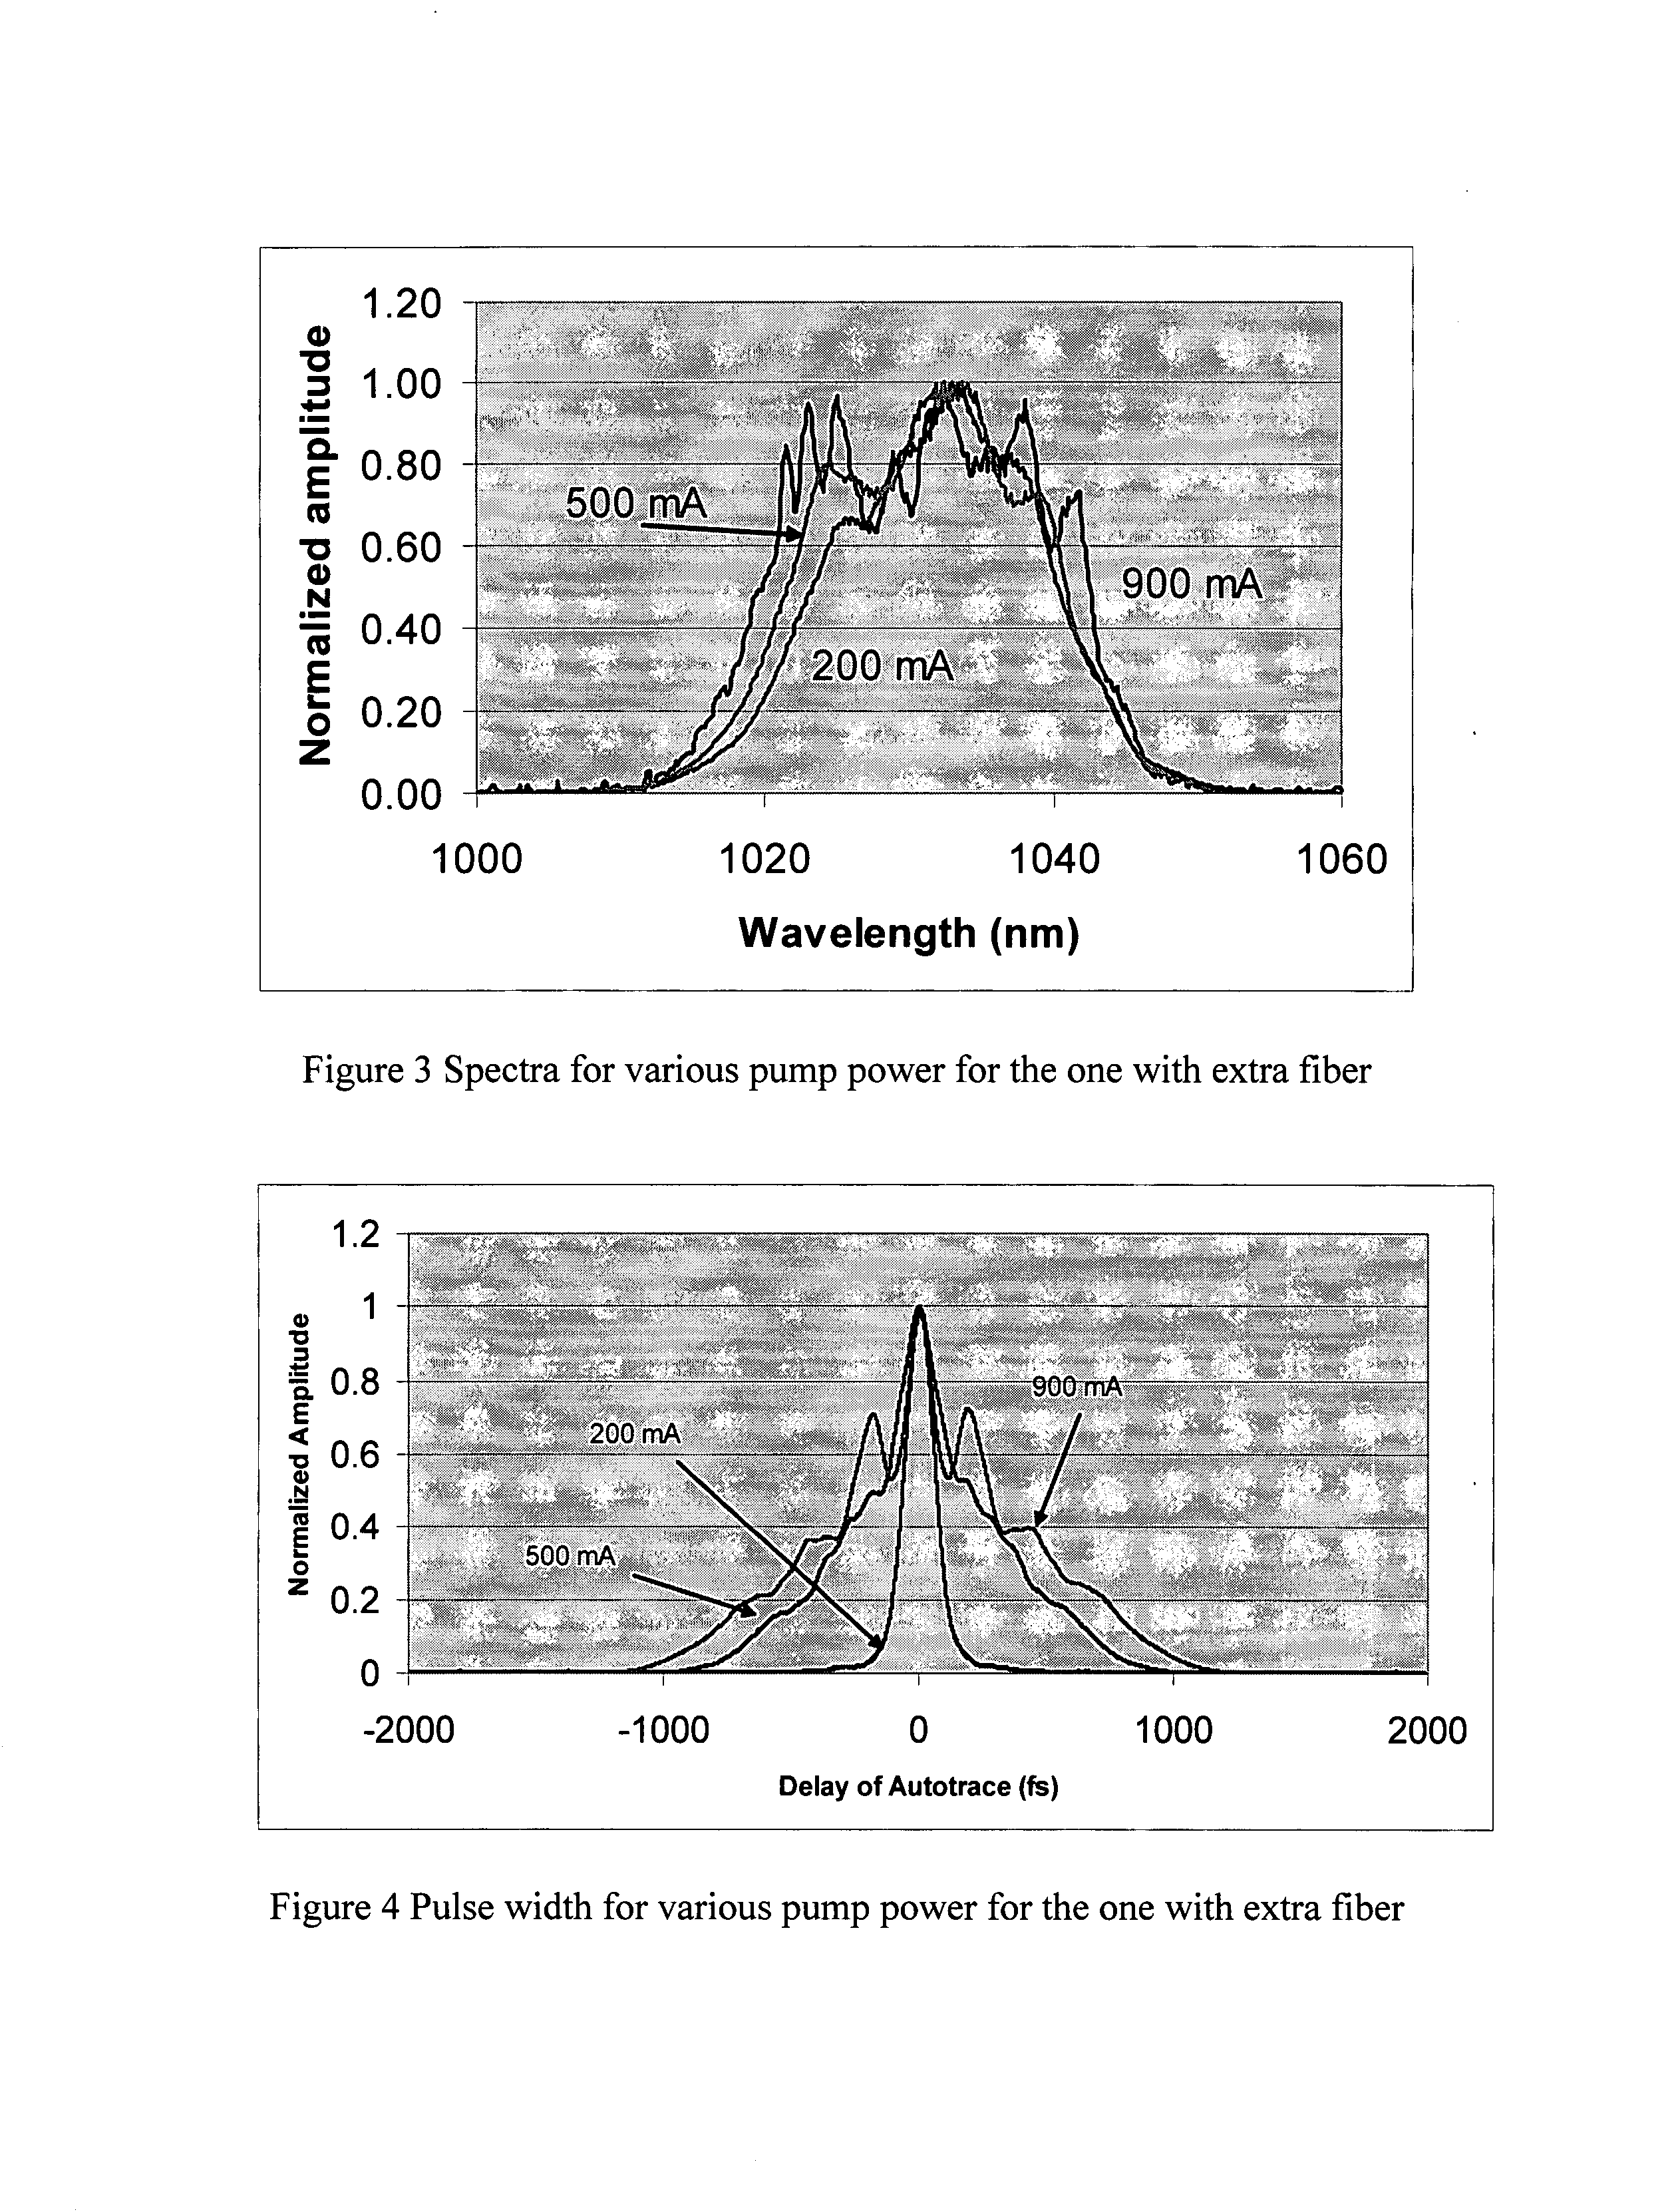 Reduction of pulse width by spectral broadening in amplification stage and after amplification stage